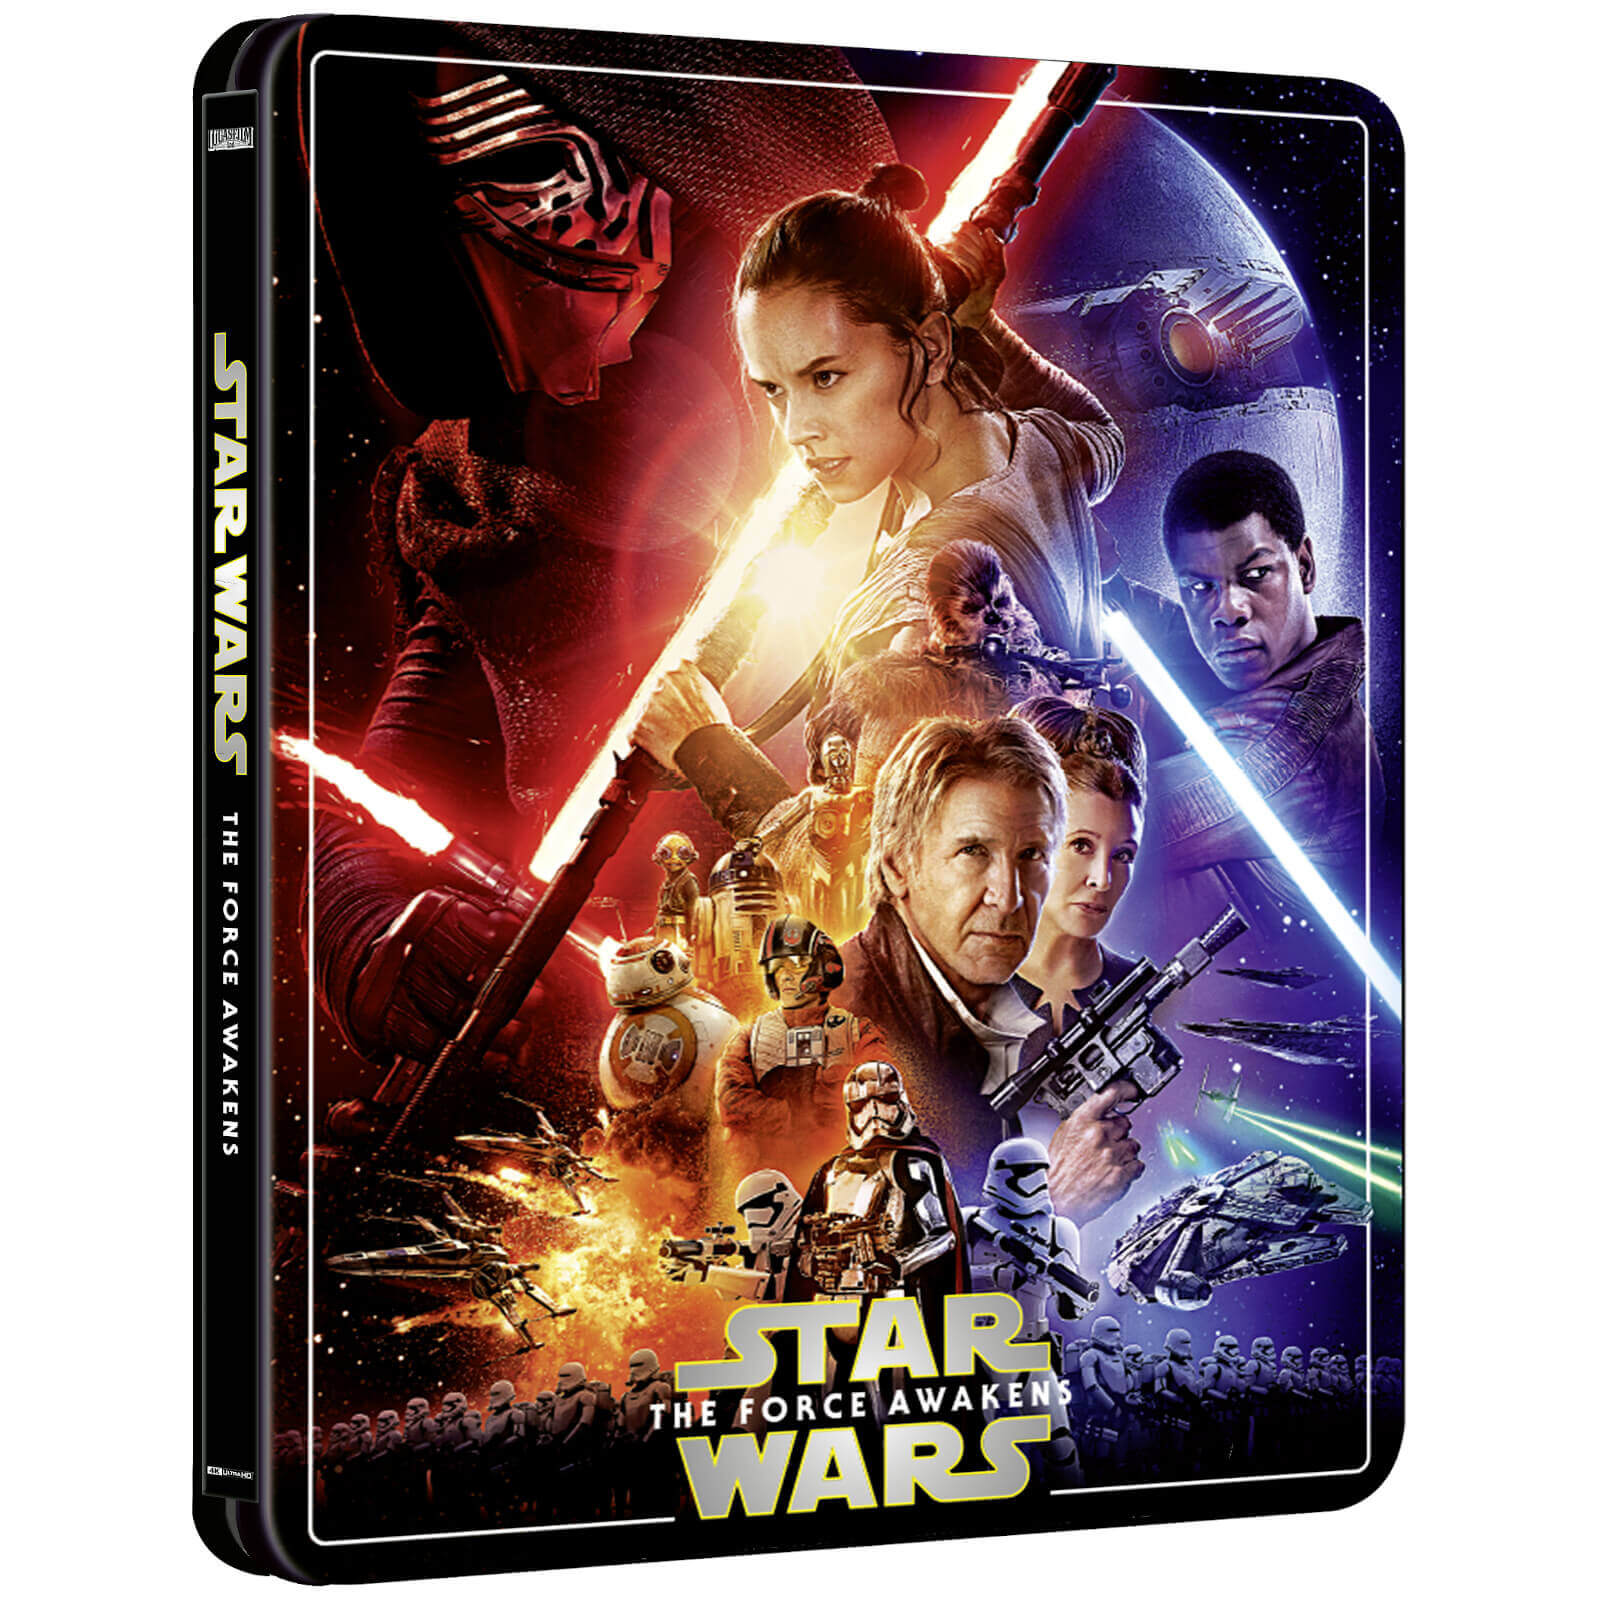 Star Wars Episode VII: The Force Awakens - Zavvi Exclusive 4K Ultra HD Steelbook (3 Disc Edition includes Blu-ray)